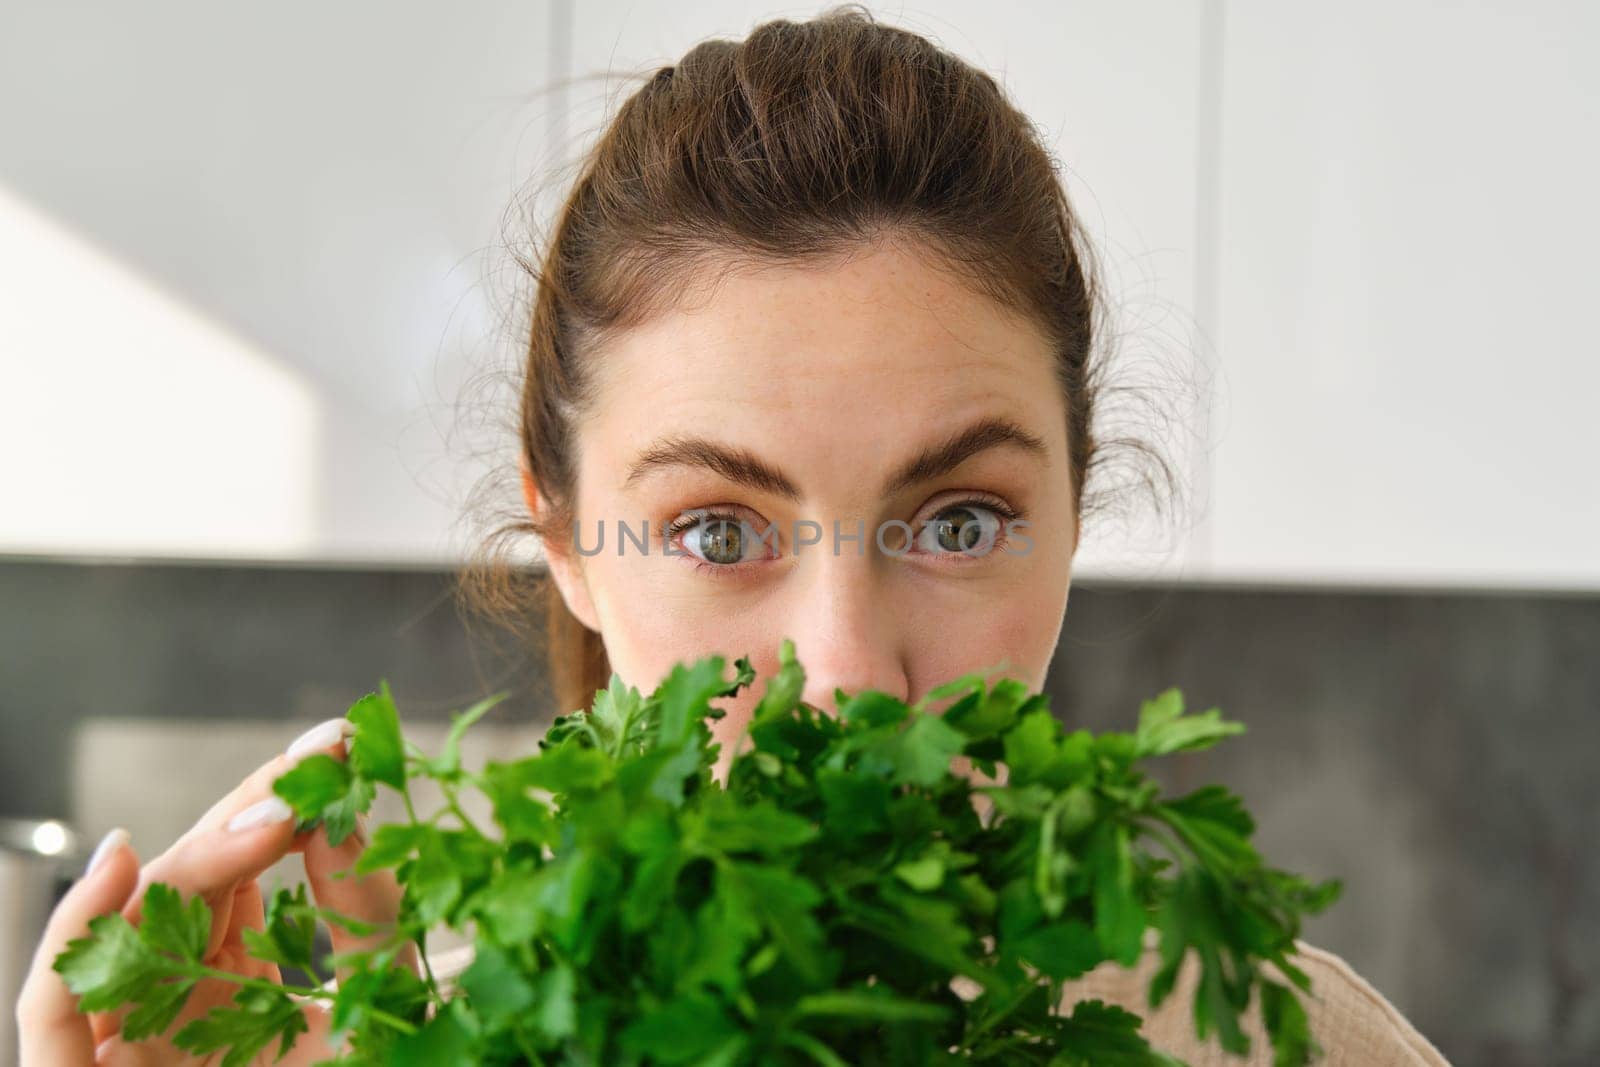 Portrait of attractive girl with bunch of parsley, eating fresh herbs and vegetables, cooking in the kitchen.